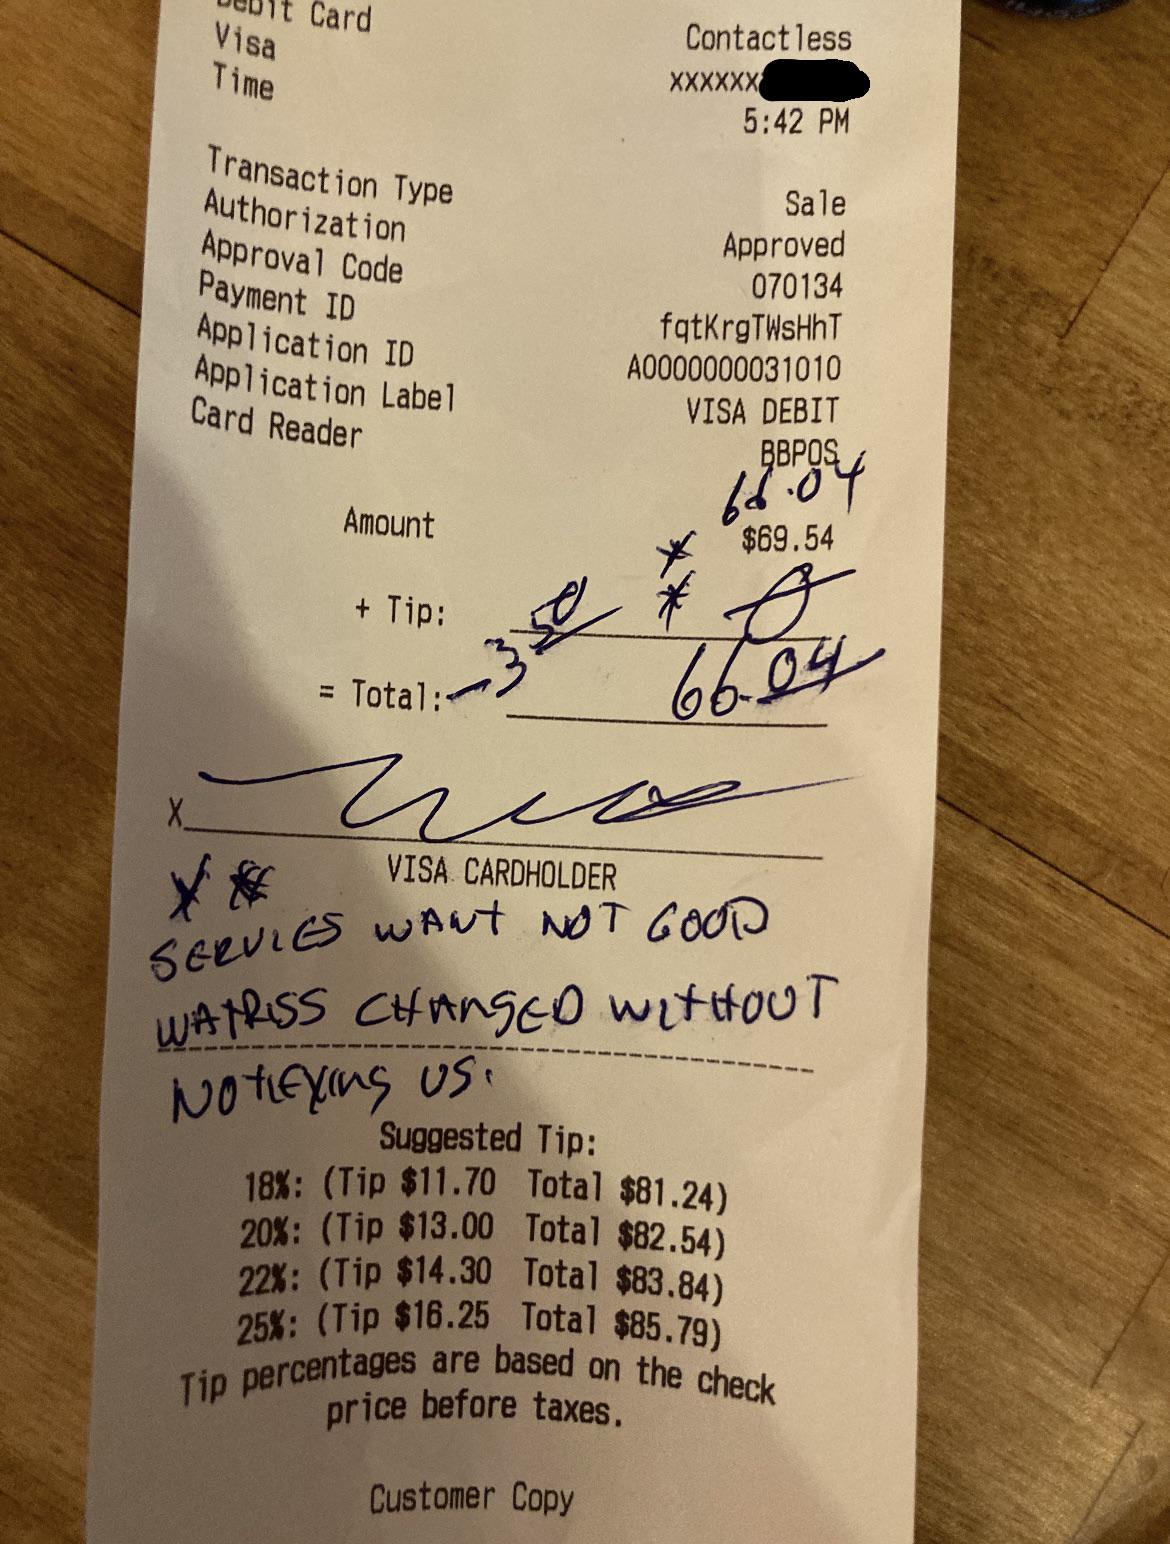 r/mildlyinfuriating - My coworker’s shift ended so I took over one of their tables. Customer did not like this and left a negative tip.